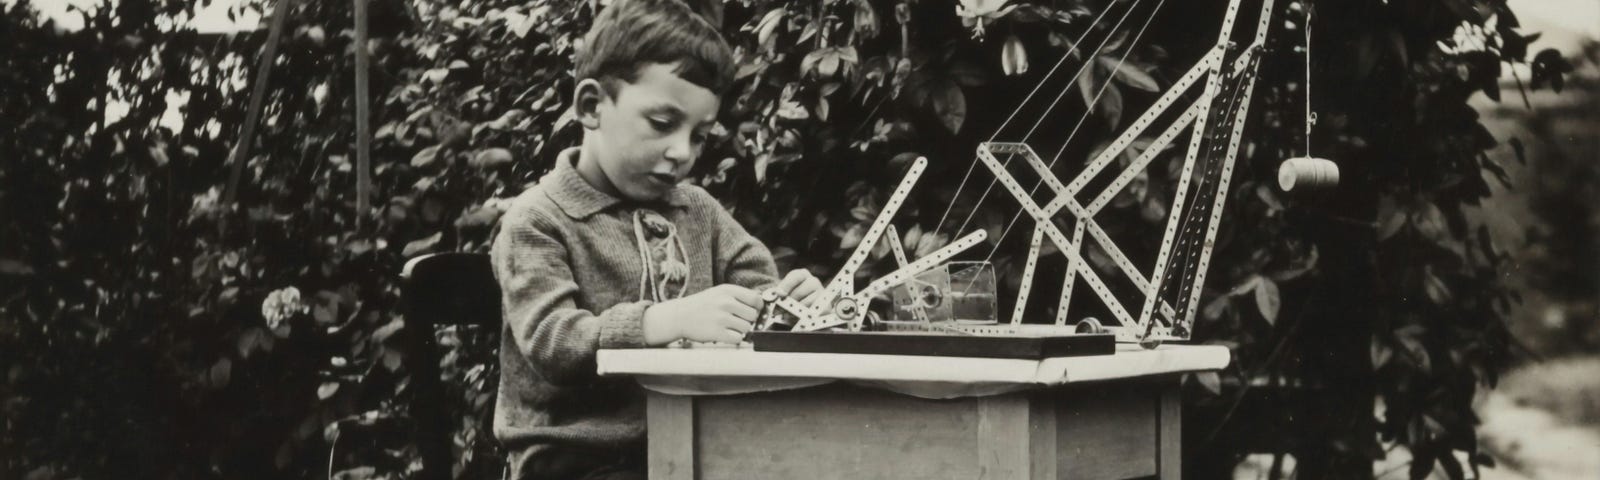 A small boy sits at a table, tinkering